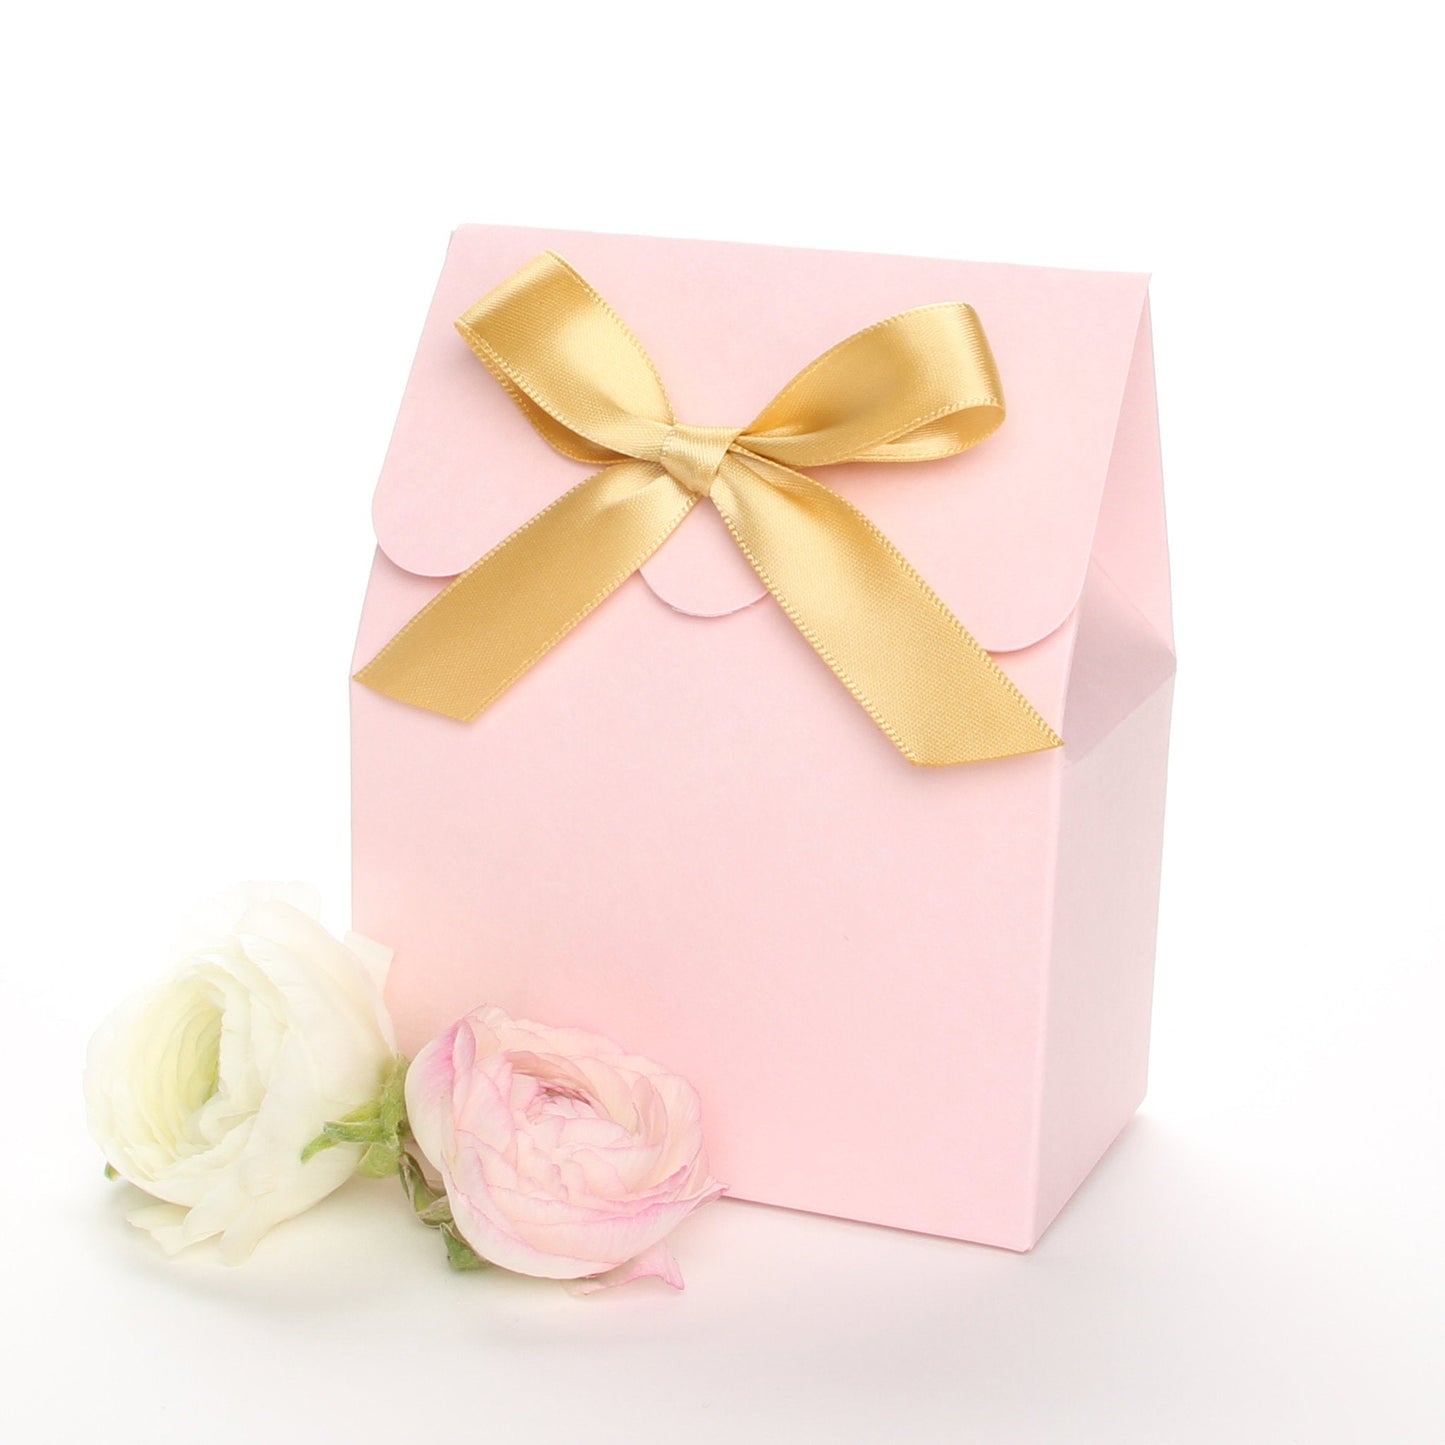 Lux Party’s pink favor box with a scalloped edge and a gold bow next to pink and white ranunculus flowers.